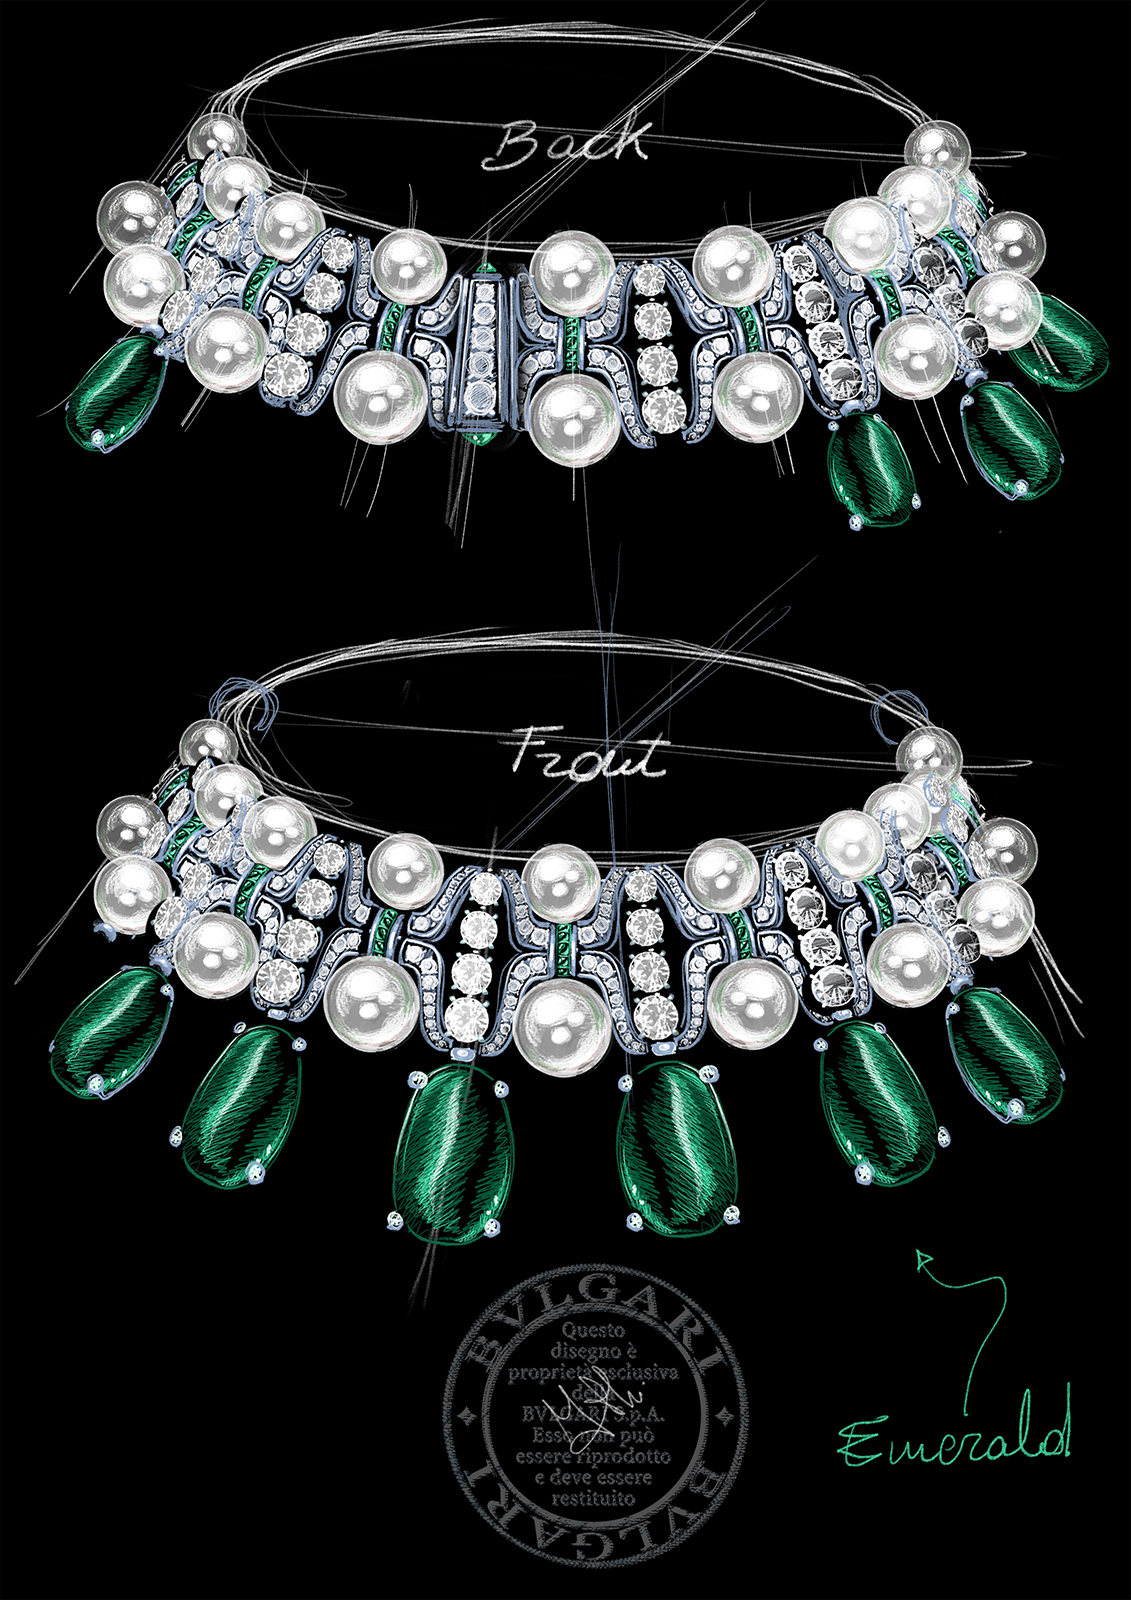 Bulgari Barocko Collection: See All the Over The Top Diamond and Gemstone  Jewelry